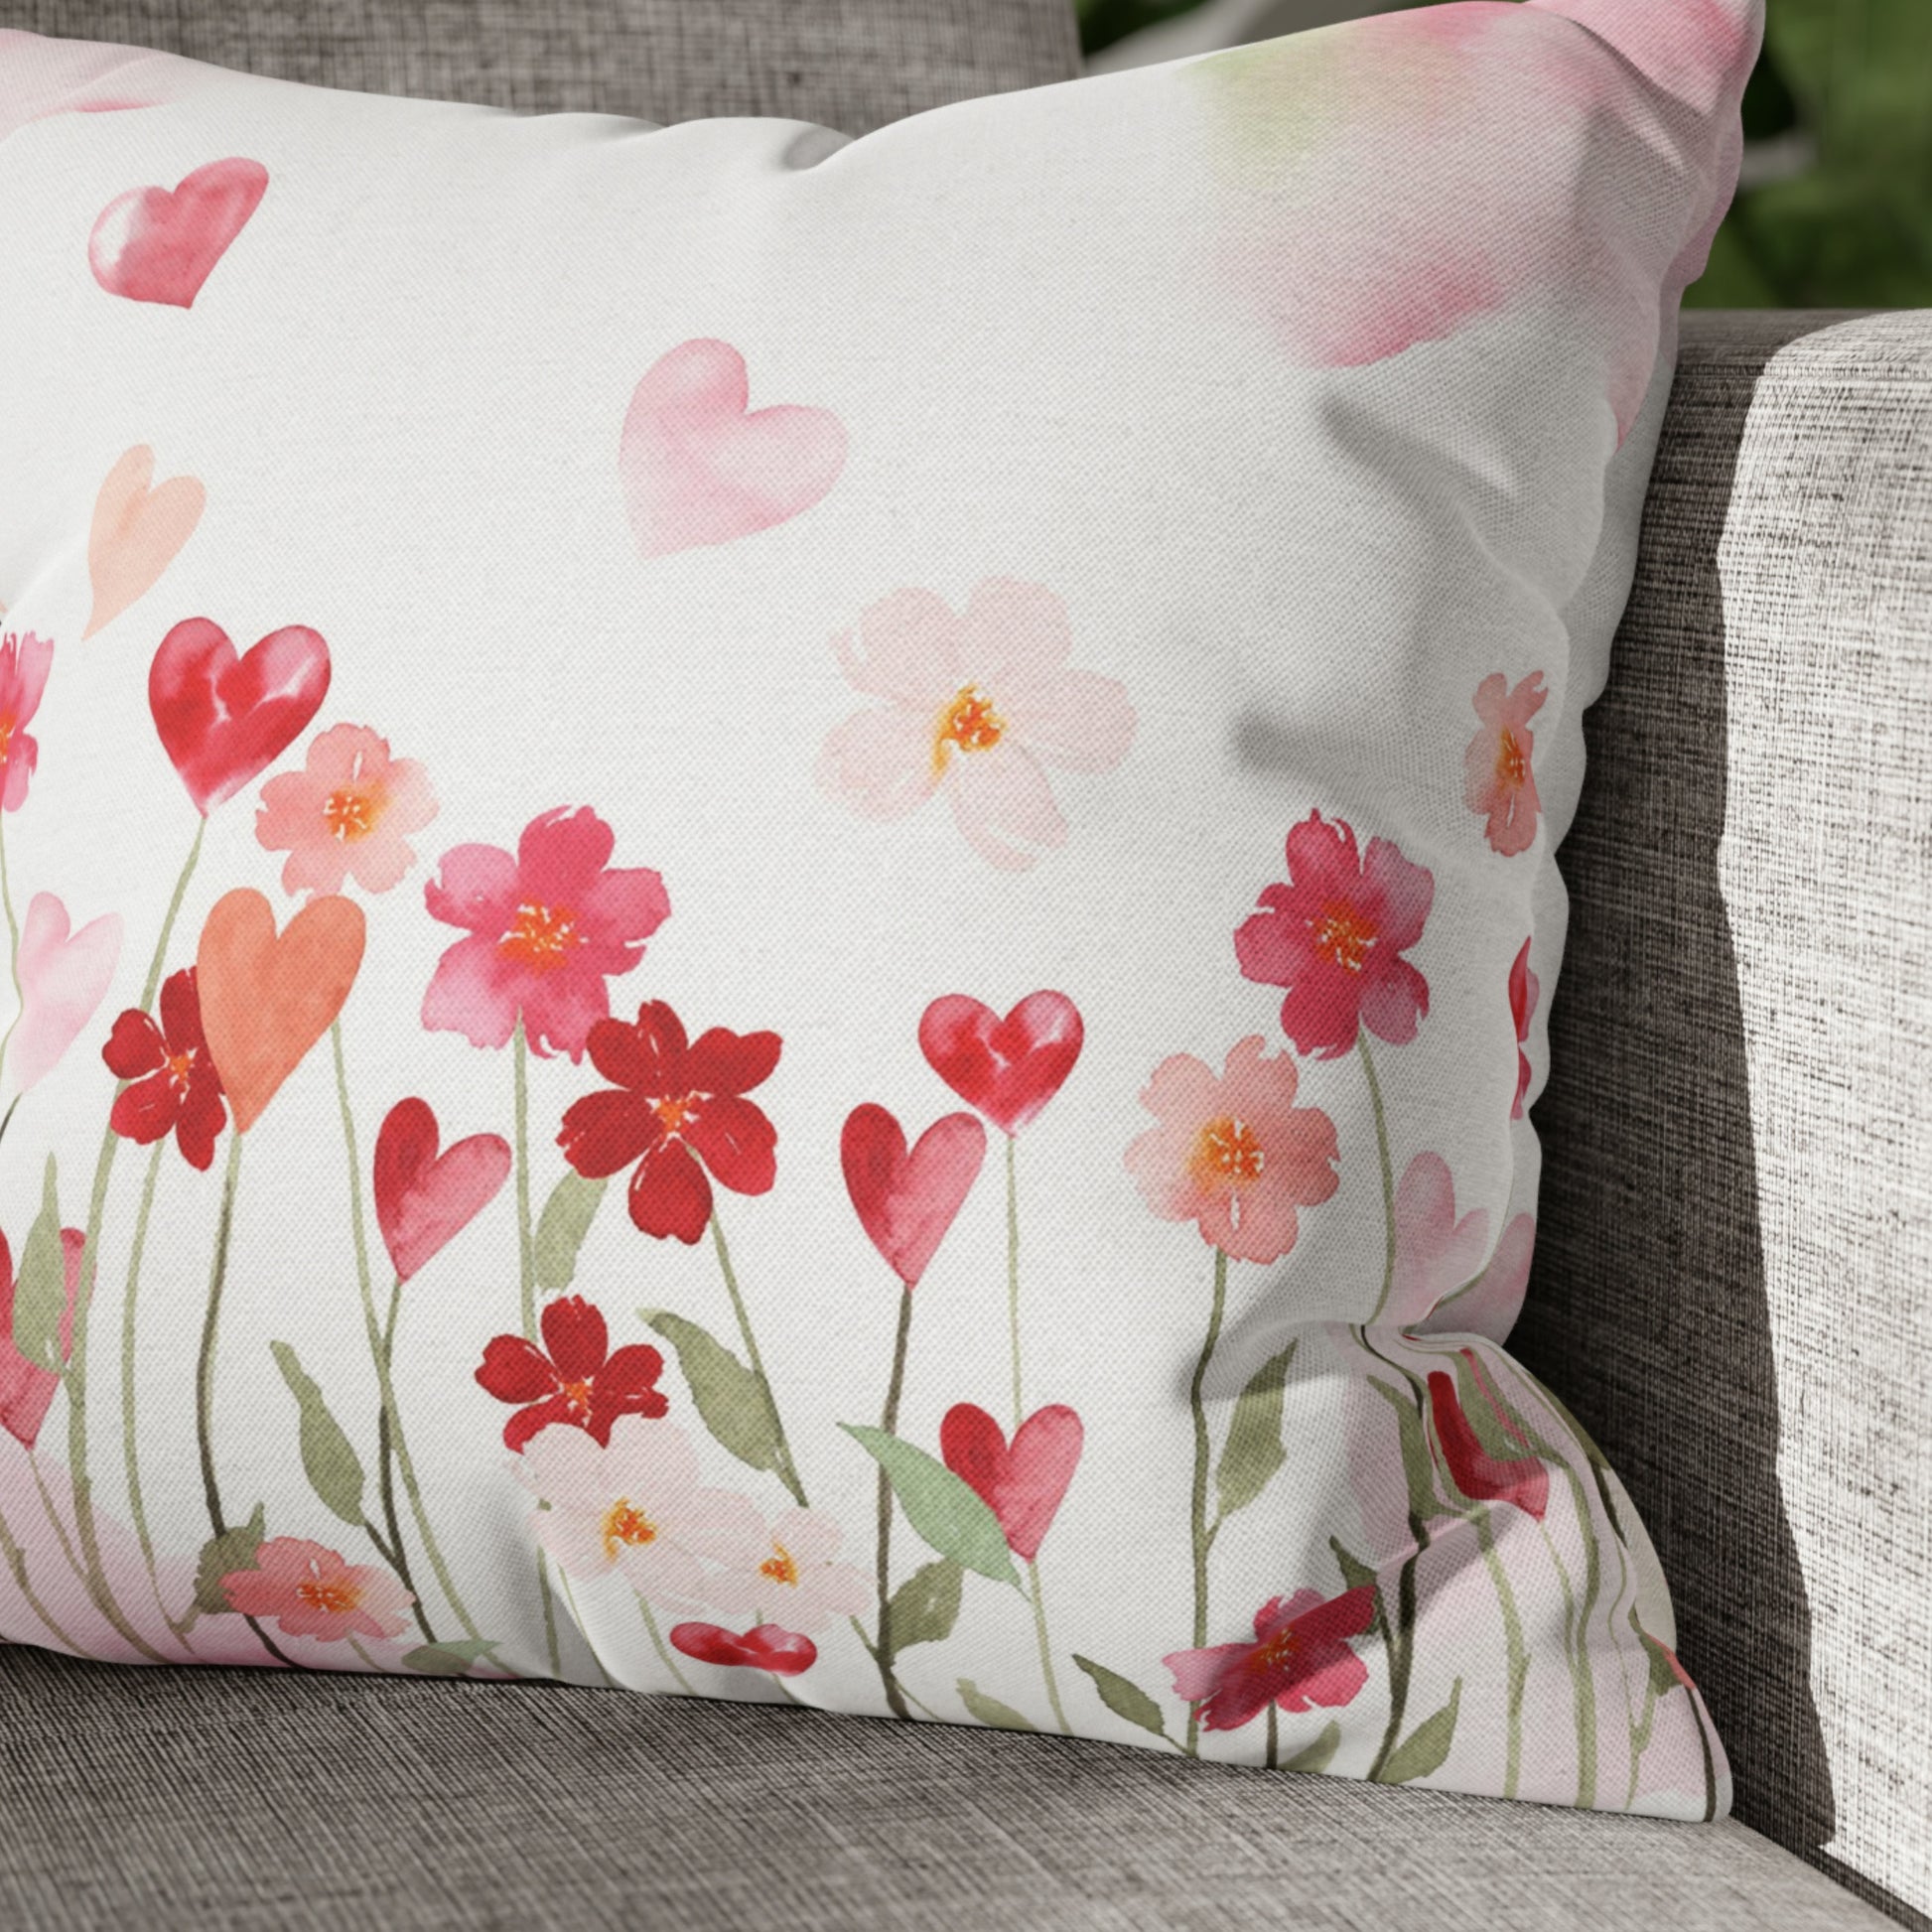 a white pillow with red and pink flowers on it